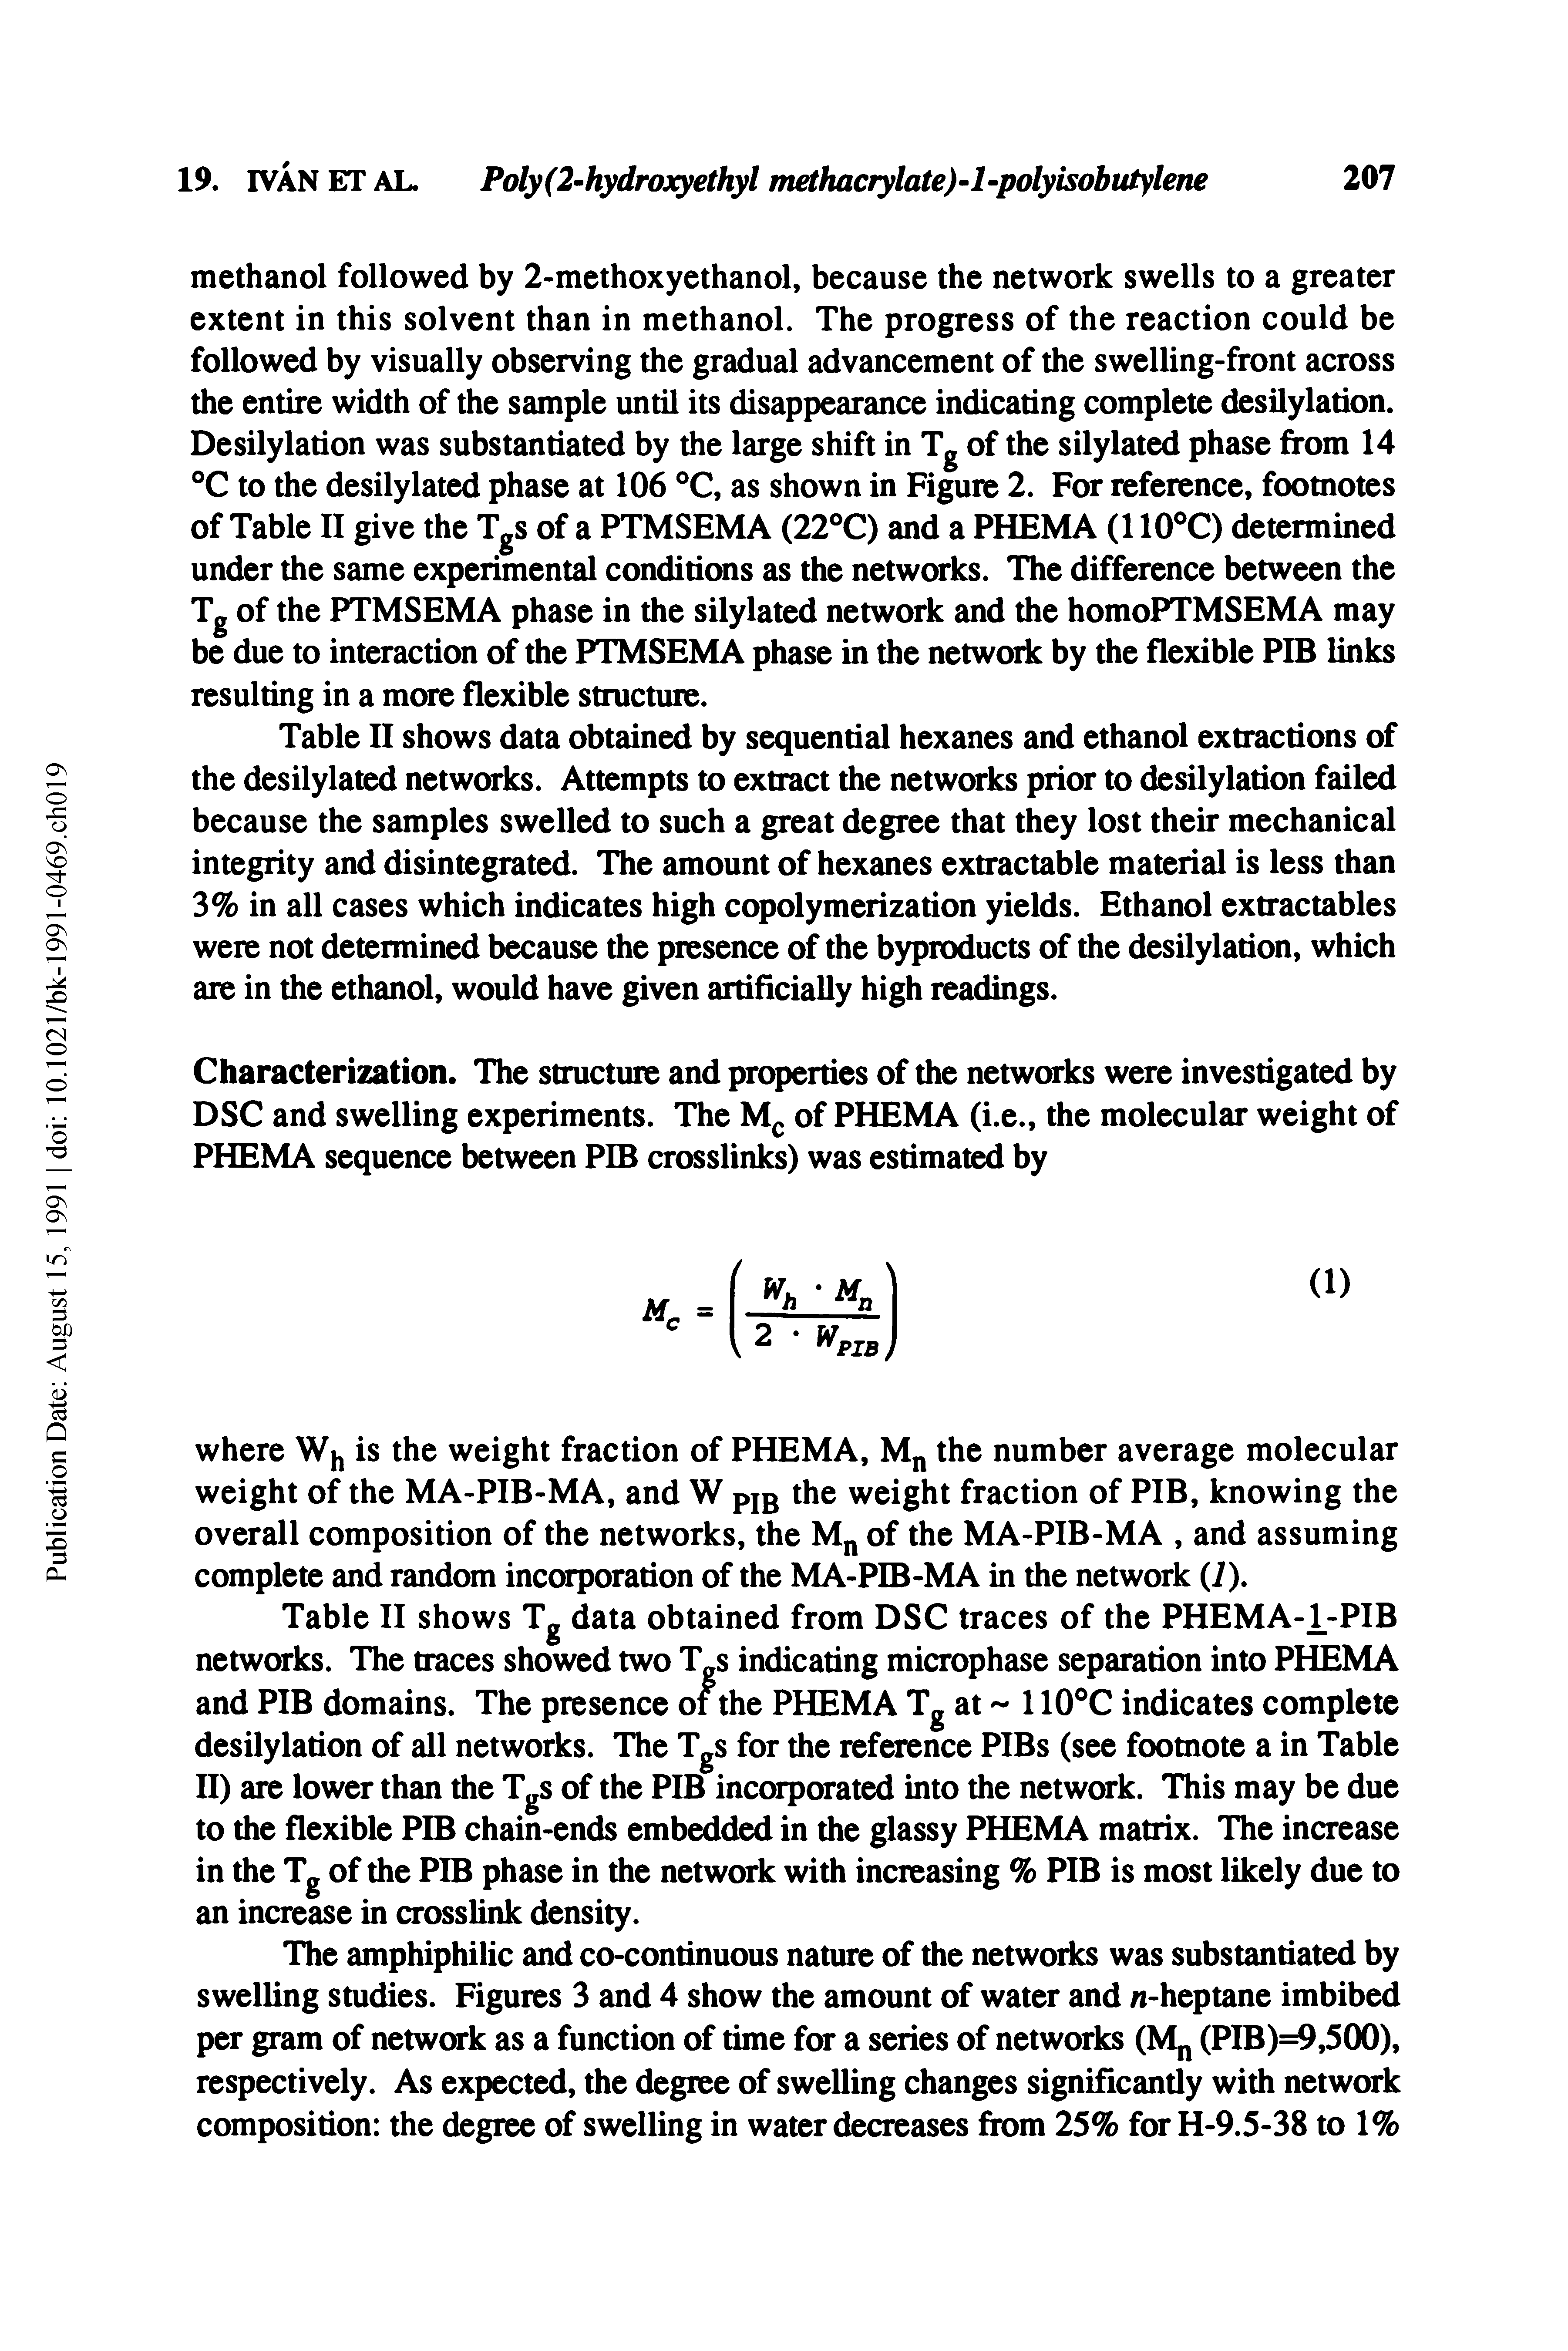 Table II shows data obtained by sequential hexanes and ethanol extractions of the desilylated networks. Attempts to extract the networks prior to desilylation failed because the samples swelled to such a great degree that they lost their mechanical integrity and disintegrated. The amount of hexanes extractable material is less than 3% in all cases which indicates high copolymerization yields. Ethanol extractables were not determined because the presence of the byproducts of the desilylation, which are in the ethanol, would have given artificially high readings.